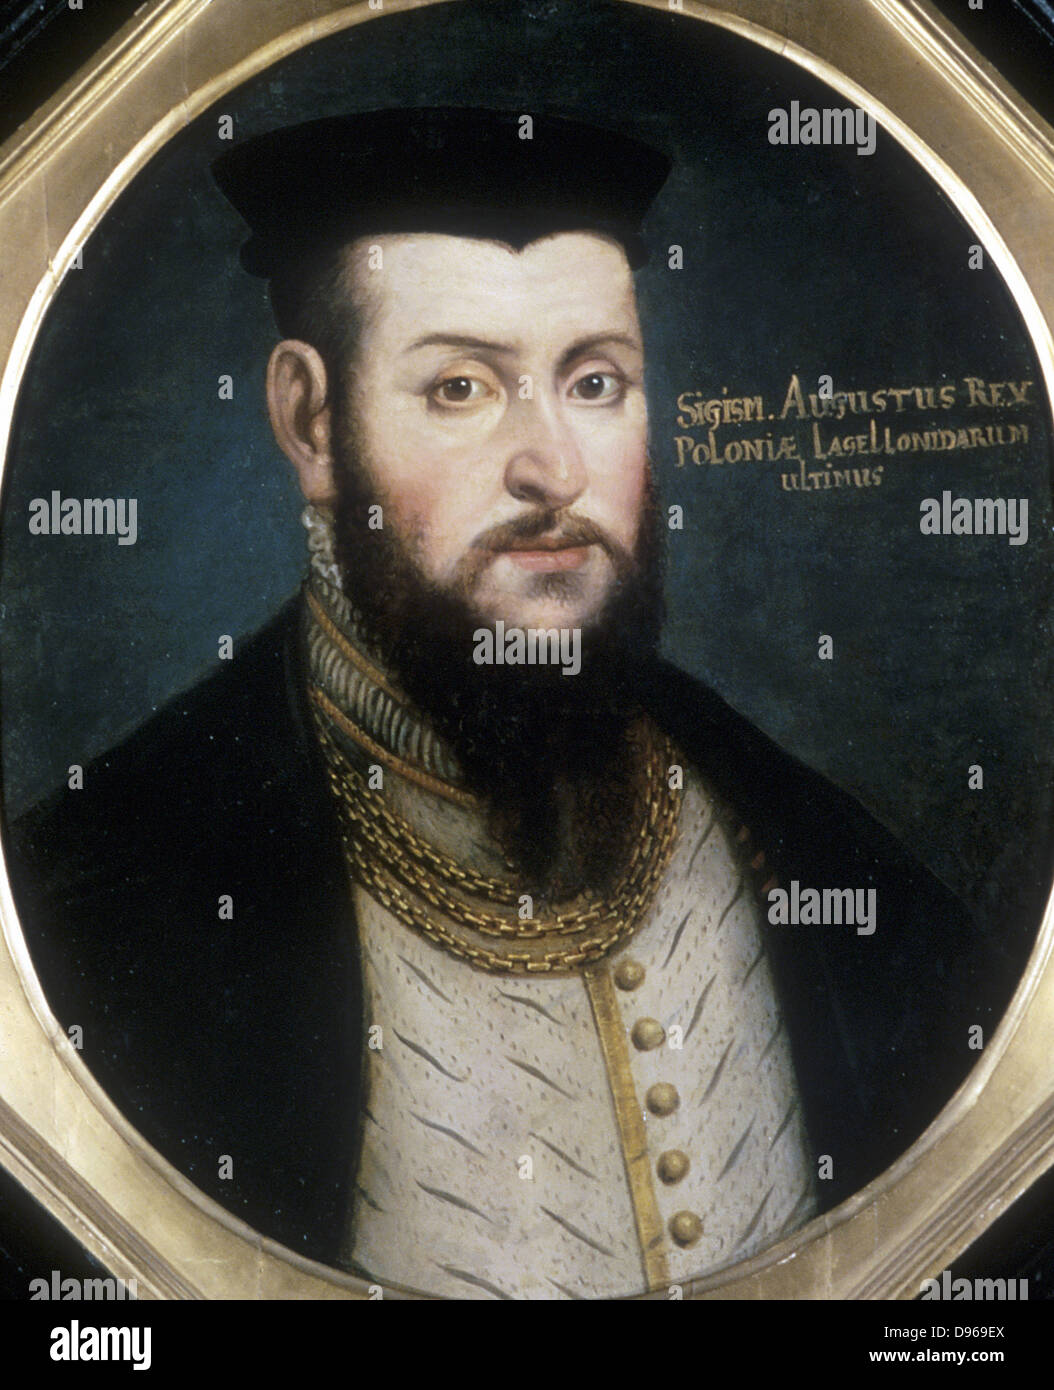 Sigismund II, Augustus (1520-72) co-ruler of Poland with his father 1530-48, sole ruler from 1548.  Anonymous portrait. Stock Photo